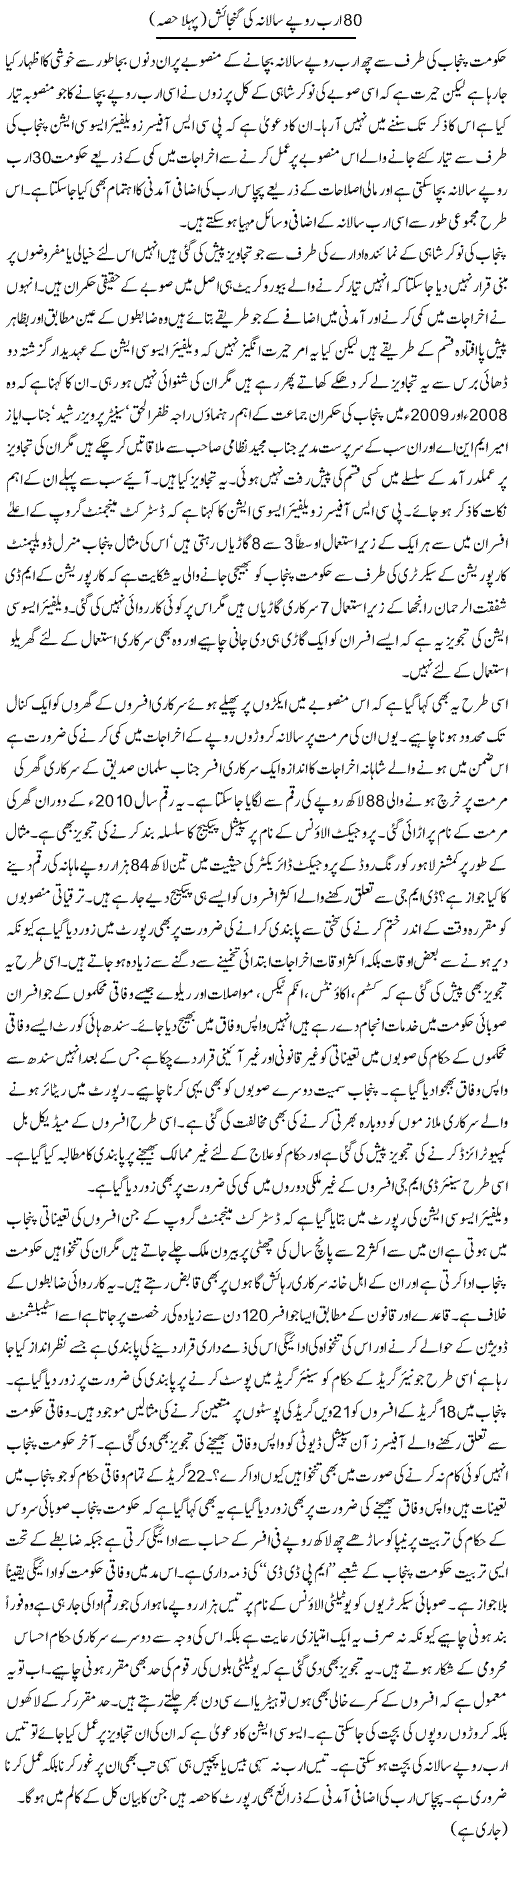 Collection 80 Billion Yearly Express Column Hameed Akhtar 10 February 2011